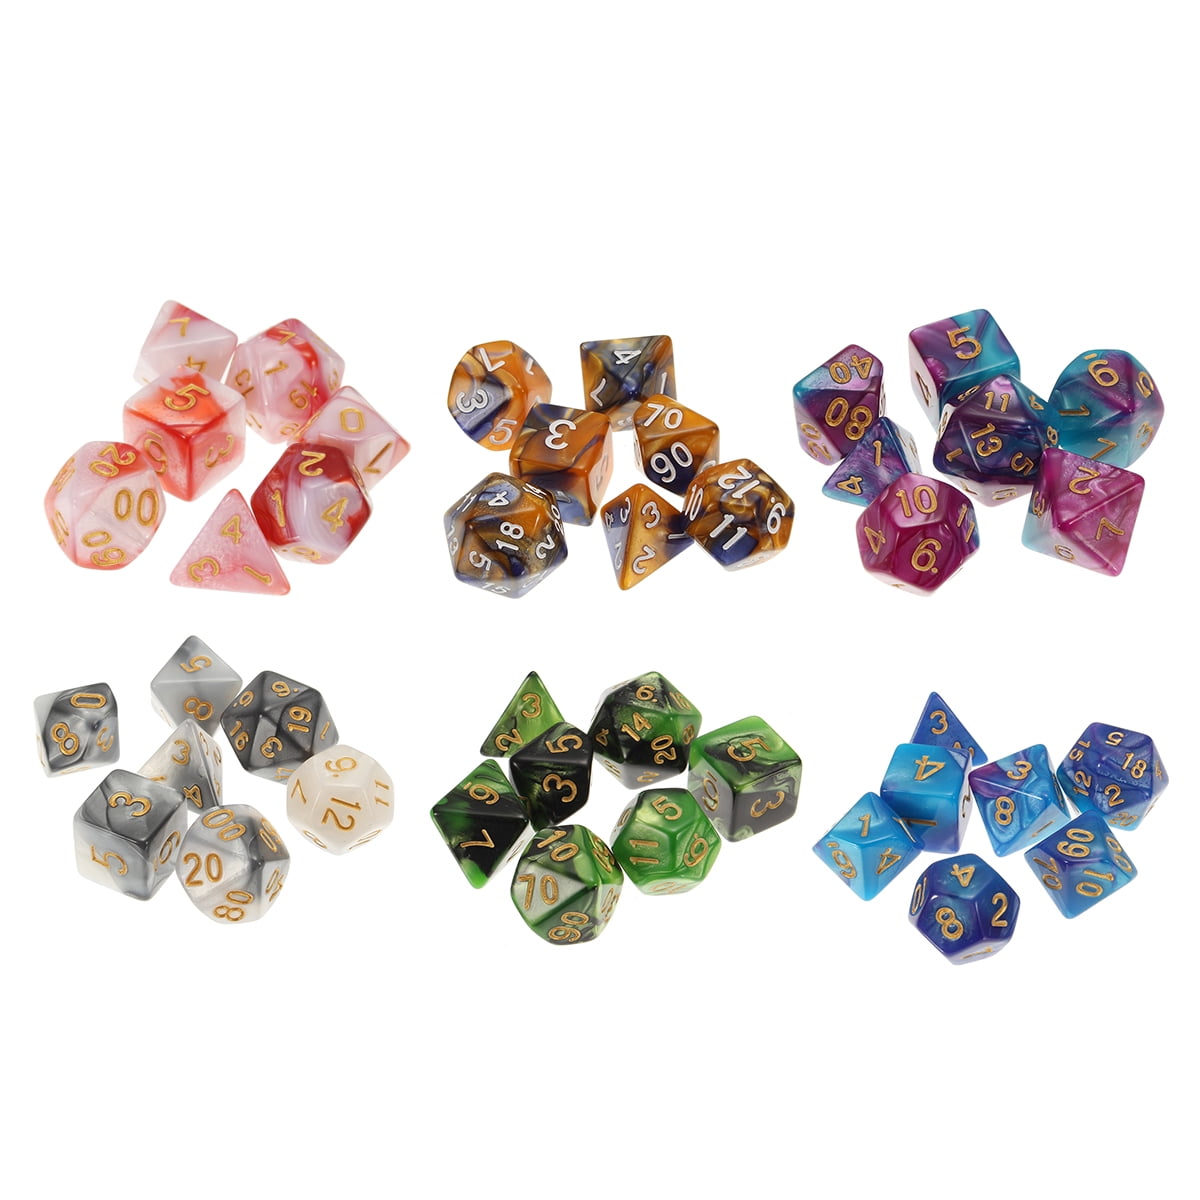 42pcs/Set Acrylic Polyhedral Dice Bag for DND RPG MTG Role Playing Board Game 